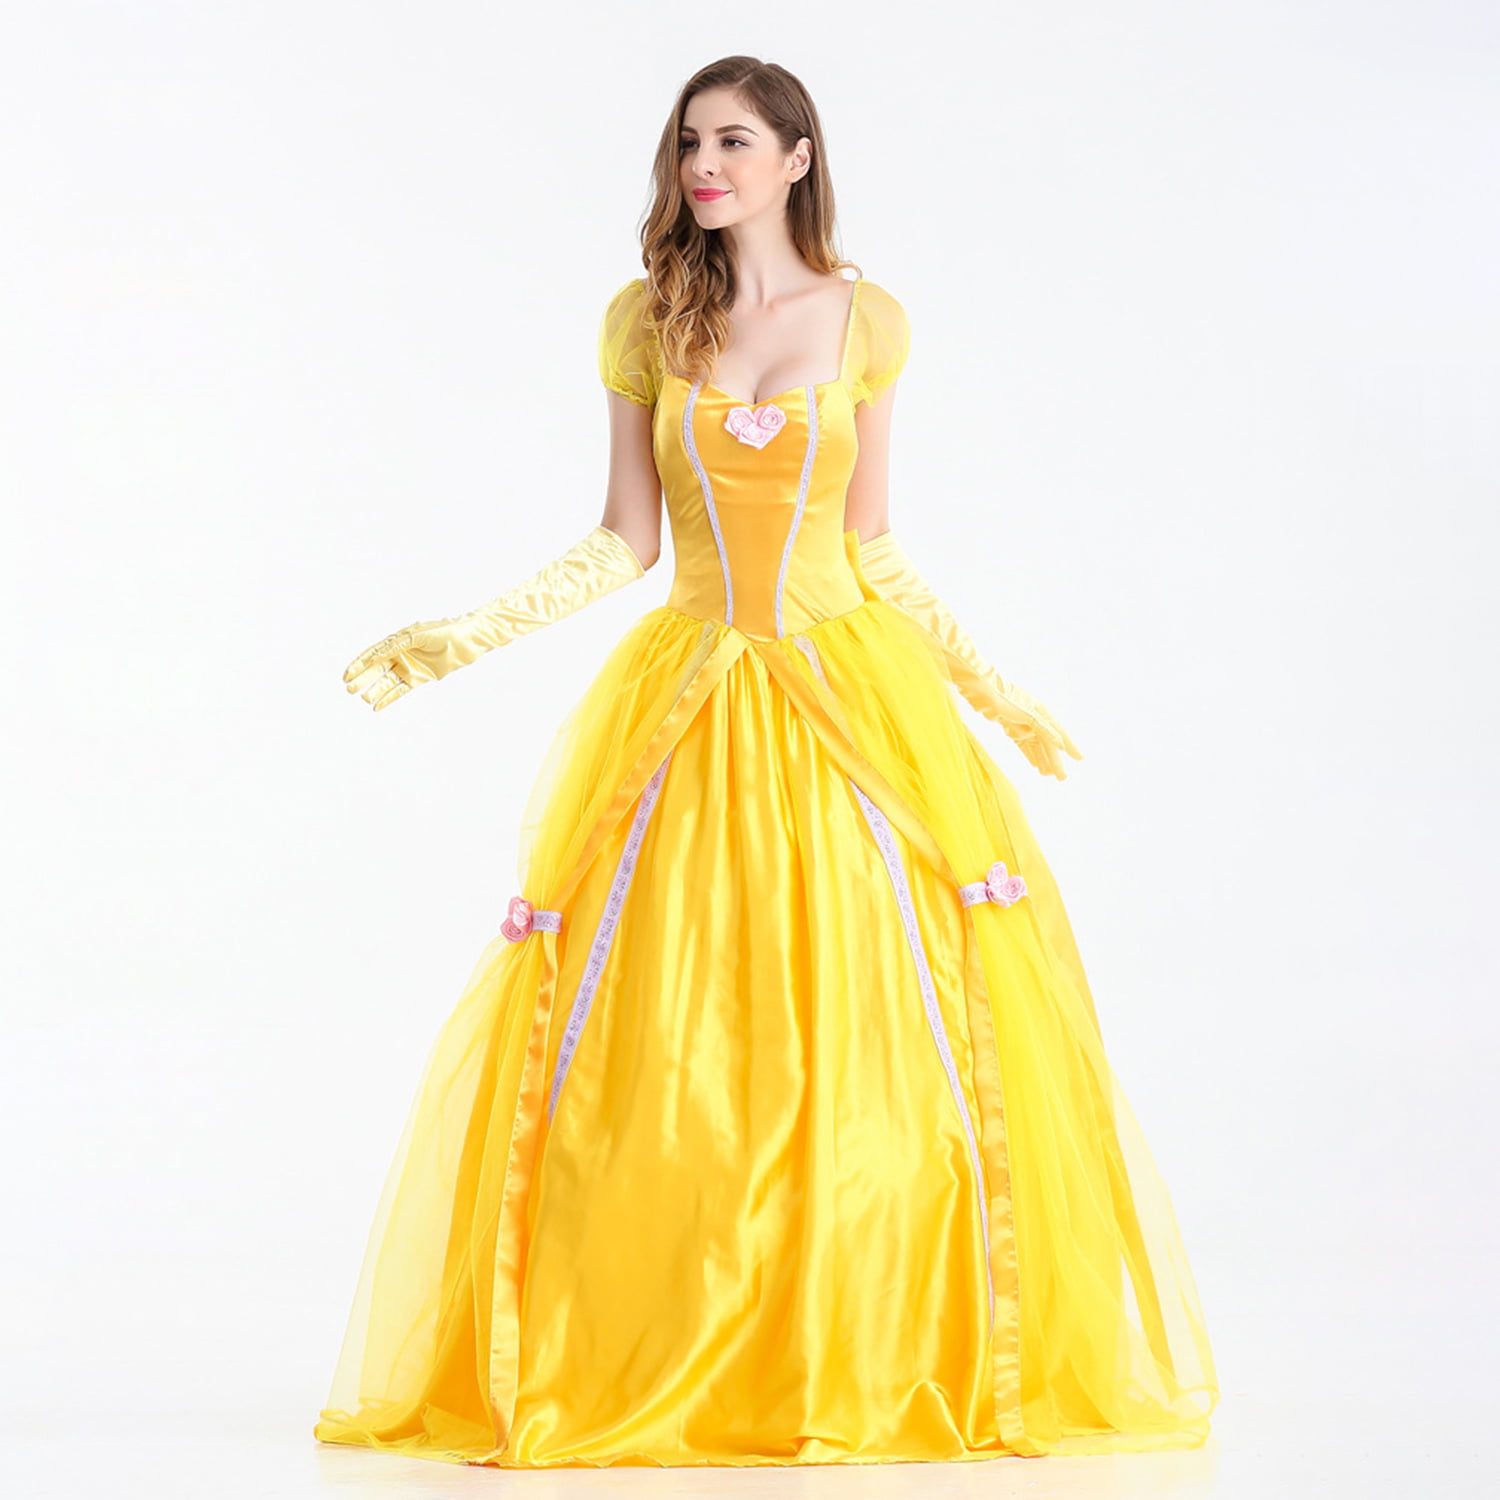 Telemacos madlavning Vægt Princess Beauty Costume for Women , Girl Princess Belle Dress up Ball Gown  with Petticoat, Halloween Costume Adult - Walmart.com